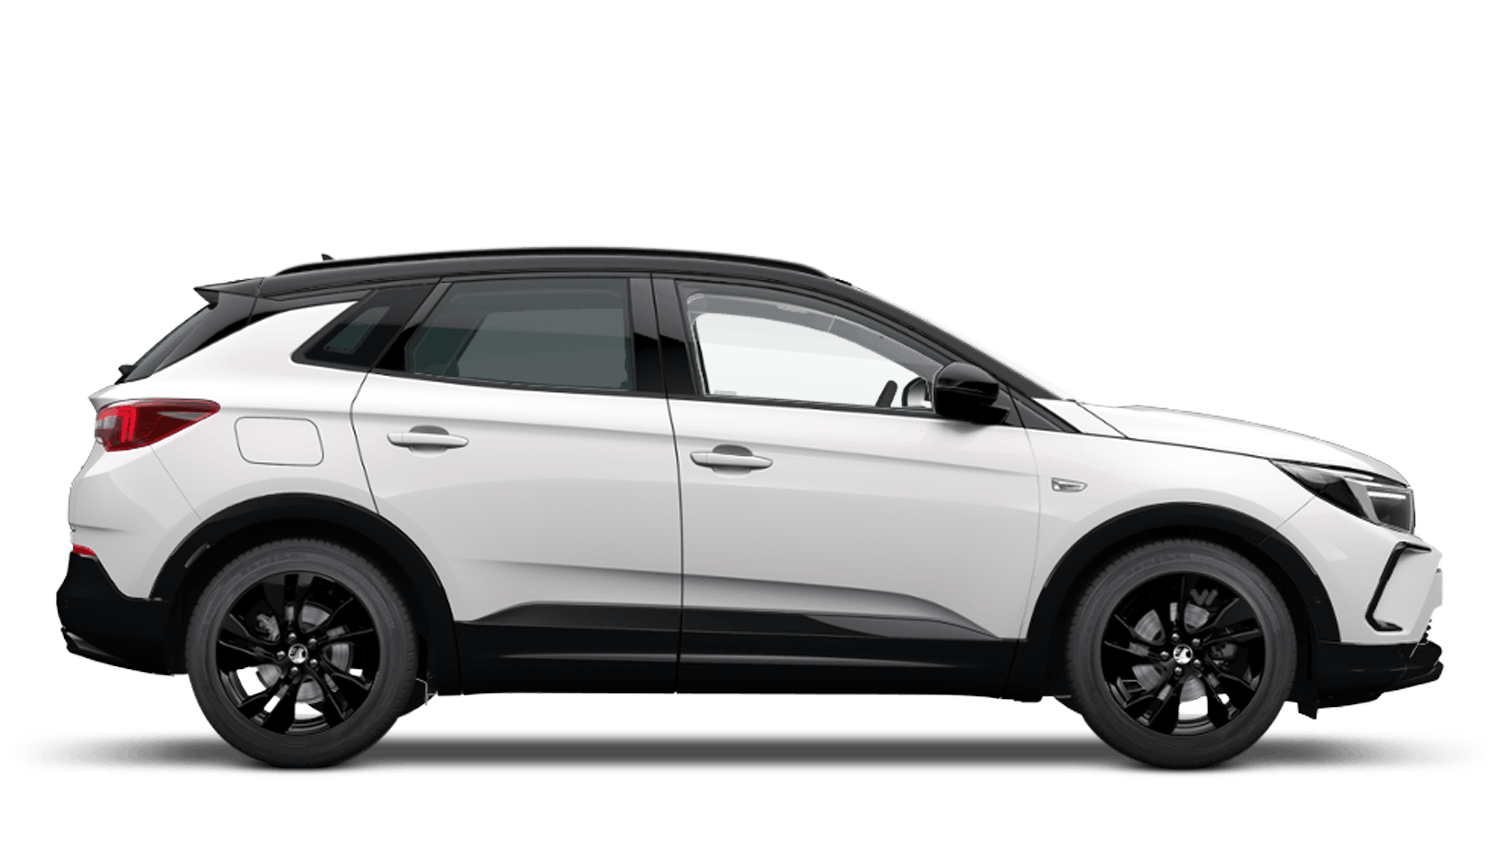 Grandland Plug-In Hybrid with up to £4,000 finance deposit contribution 8.9% APR